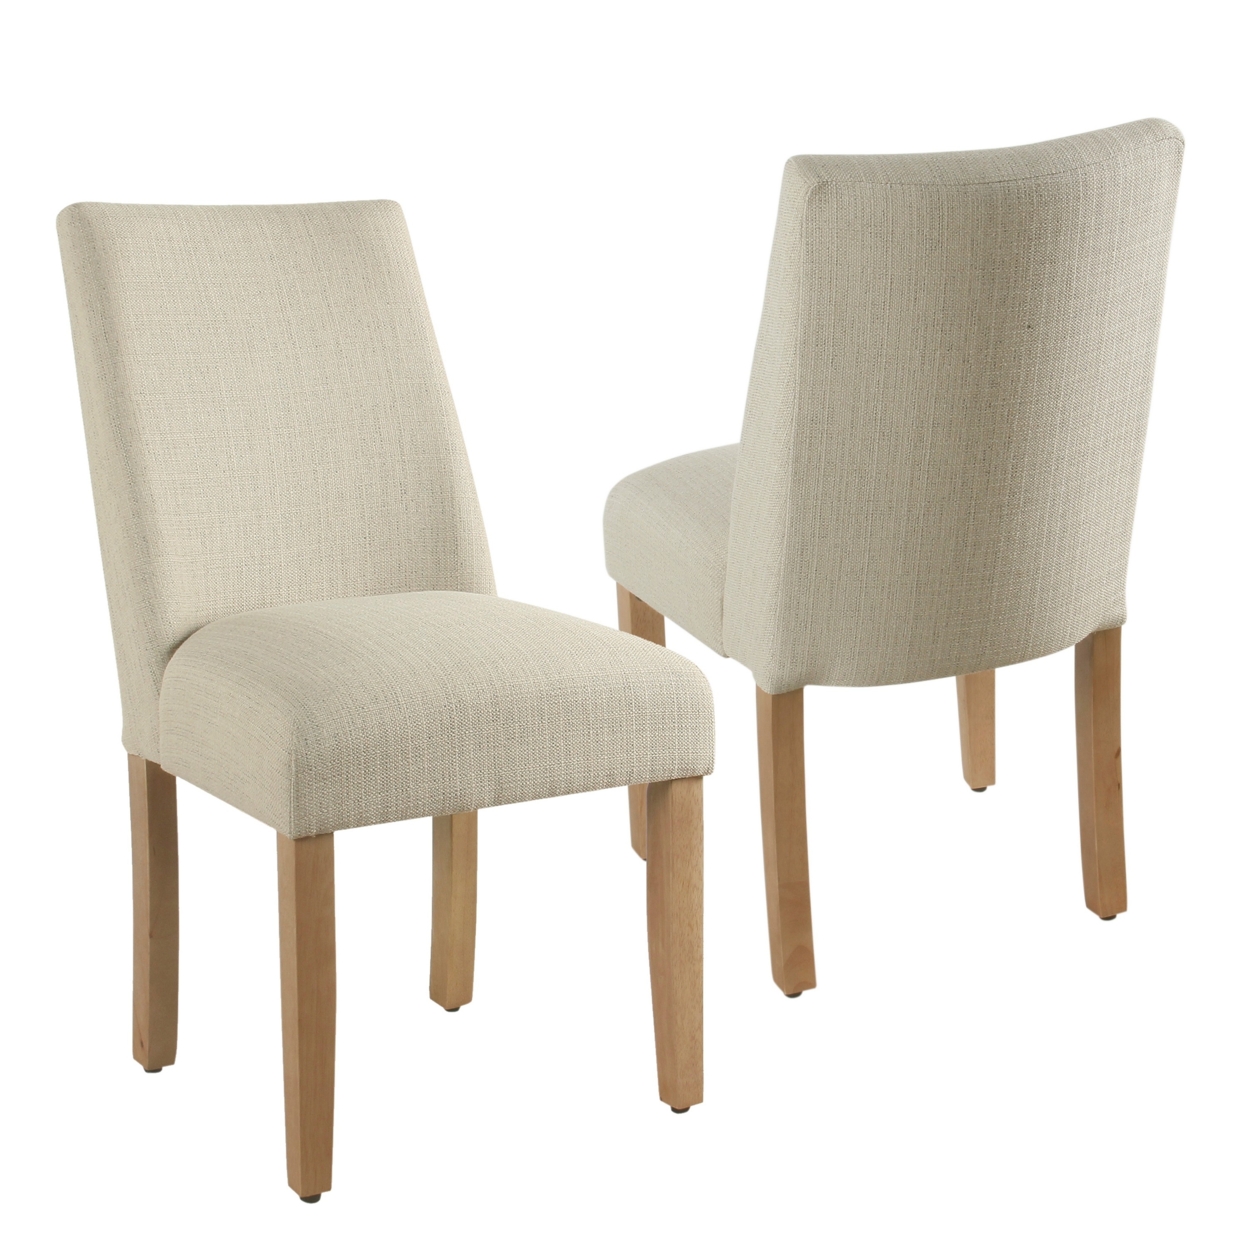 Fabric Upholstered Wooden Dining Chair, Angled Curved Backrest, Beige- Saltoro Sherpi